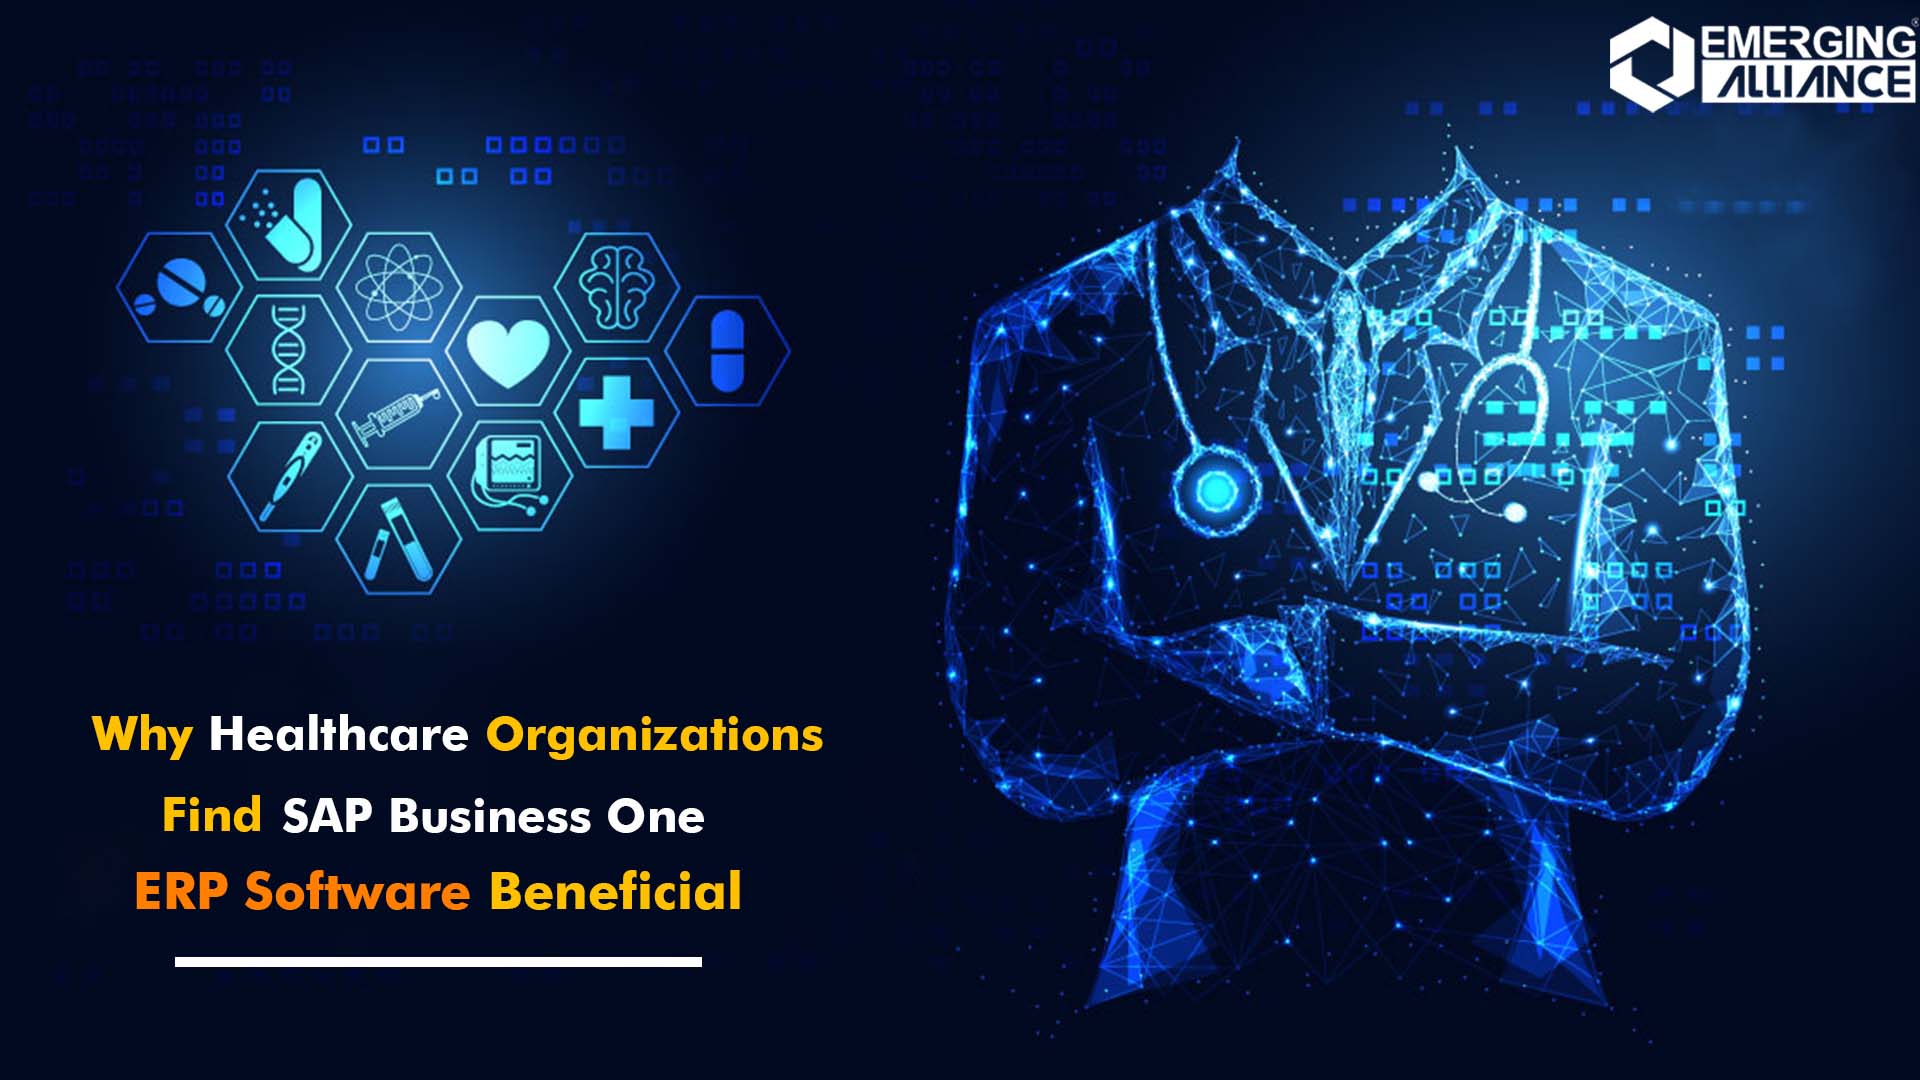 Healthcare Industry with SAP Business One